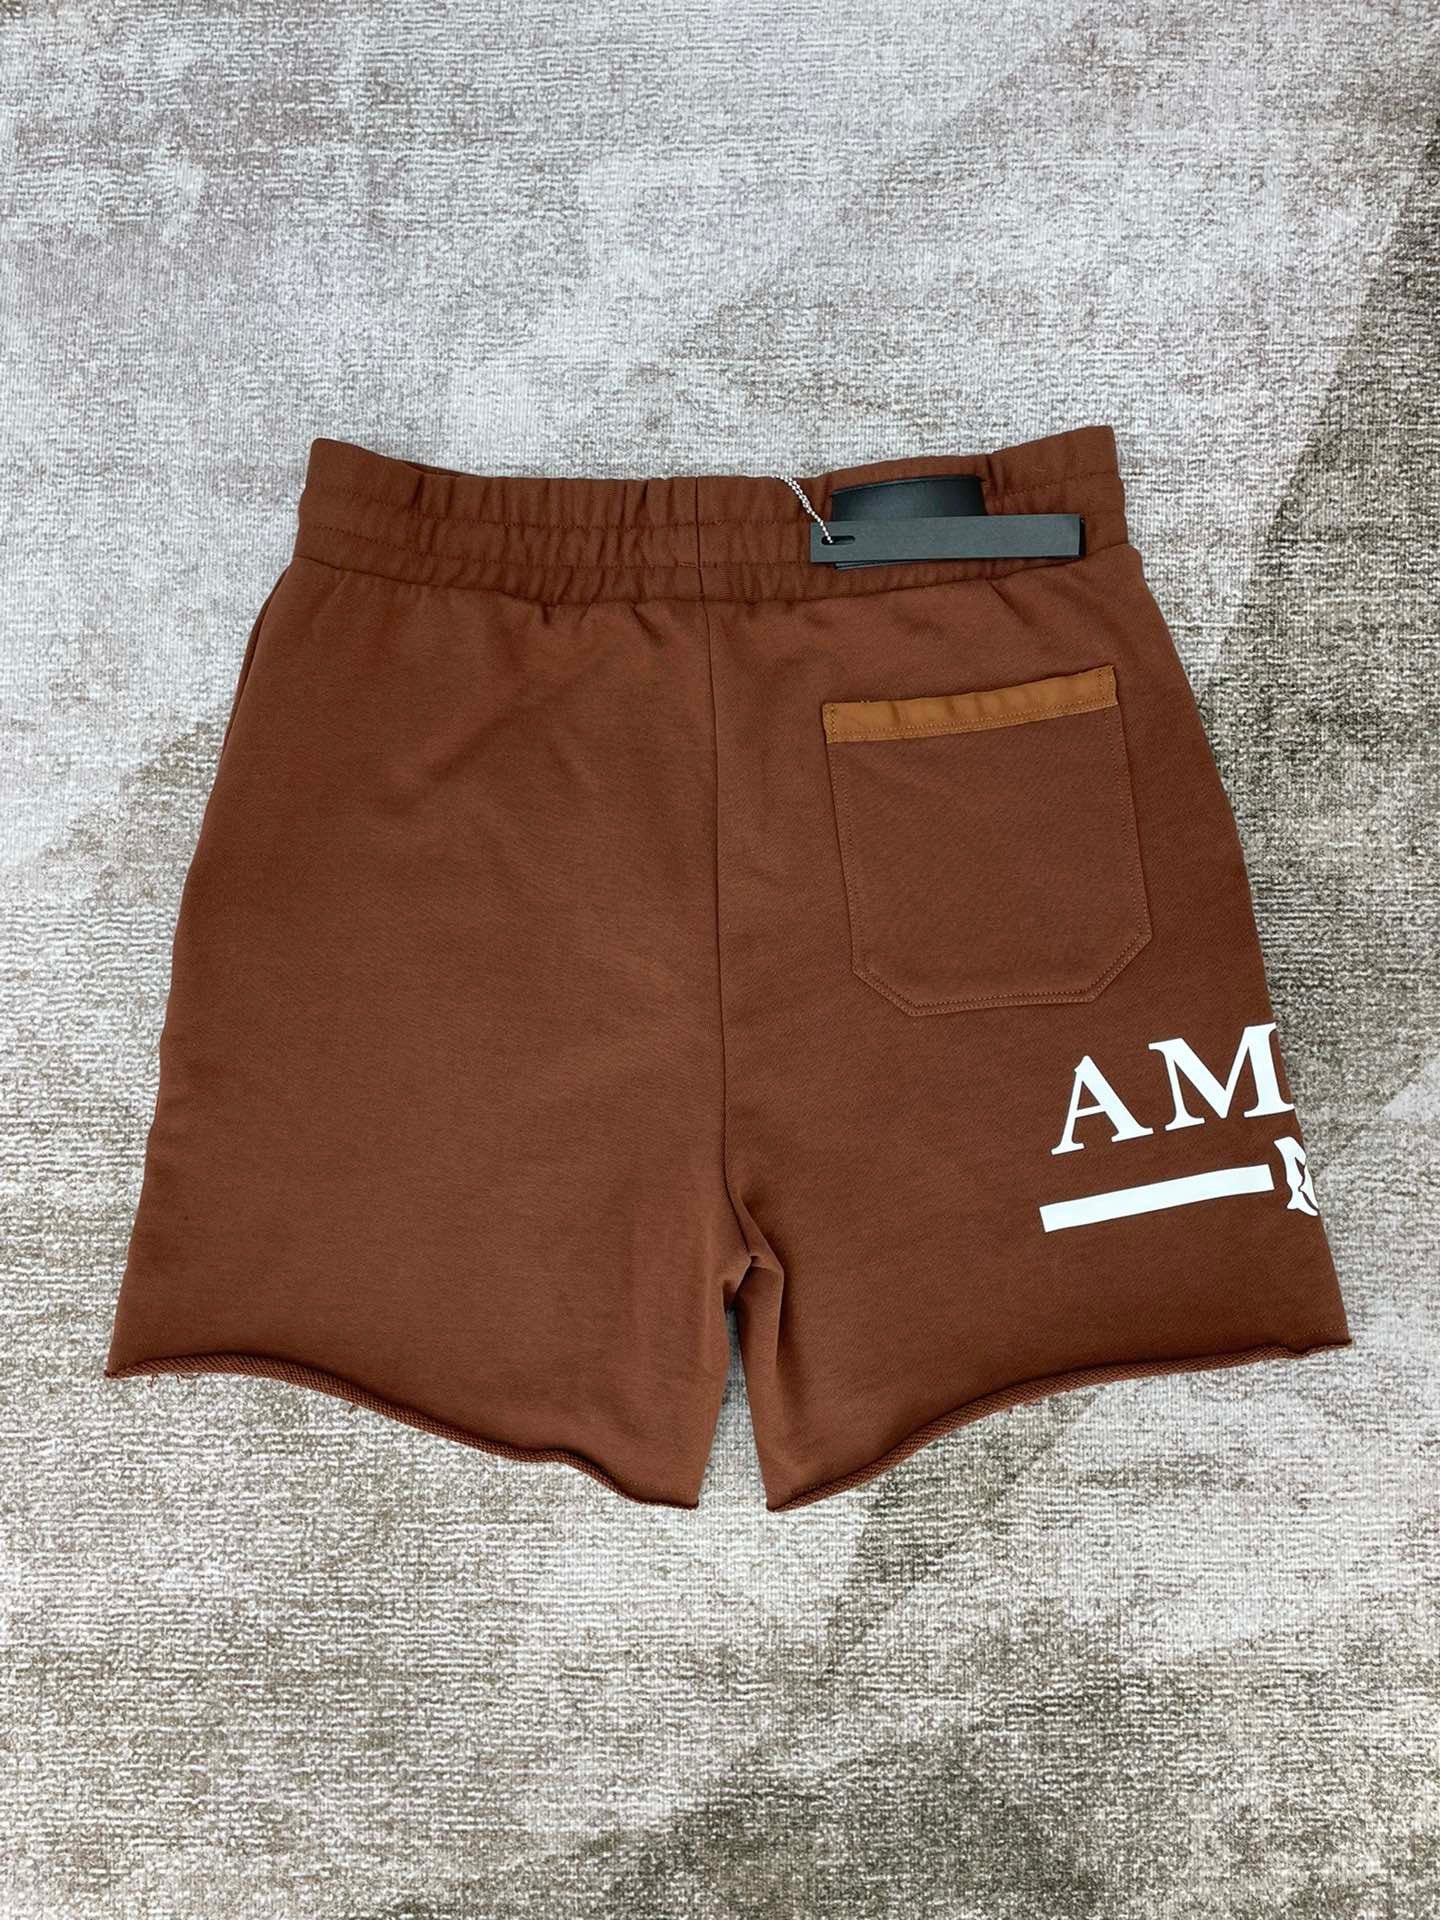 Black and Brown Short